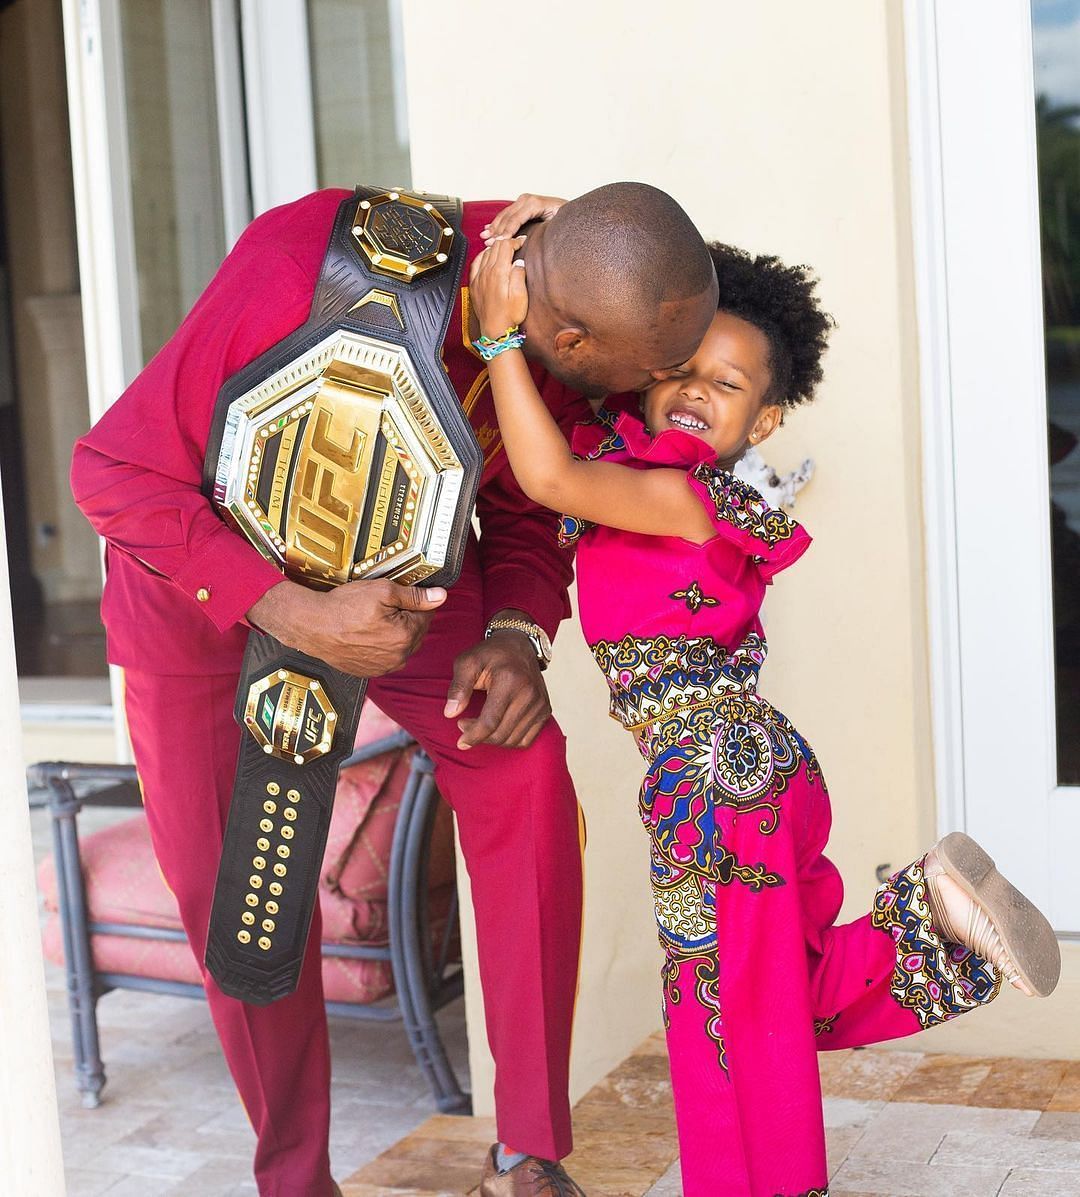 How many children does Kamaru Usman and Eleslie Dietzsch have?